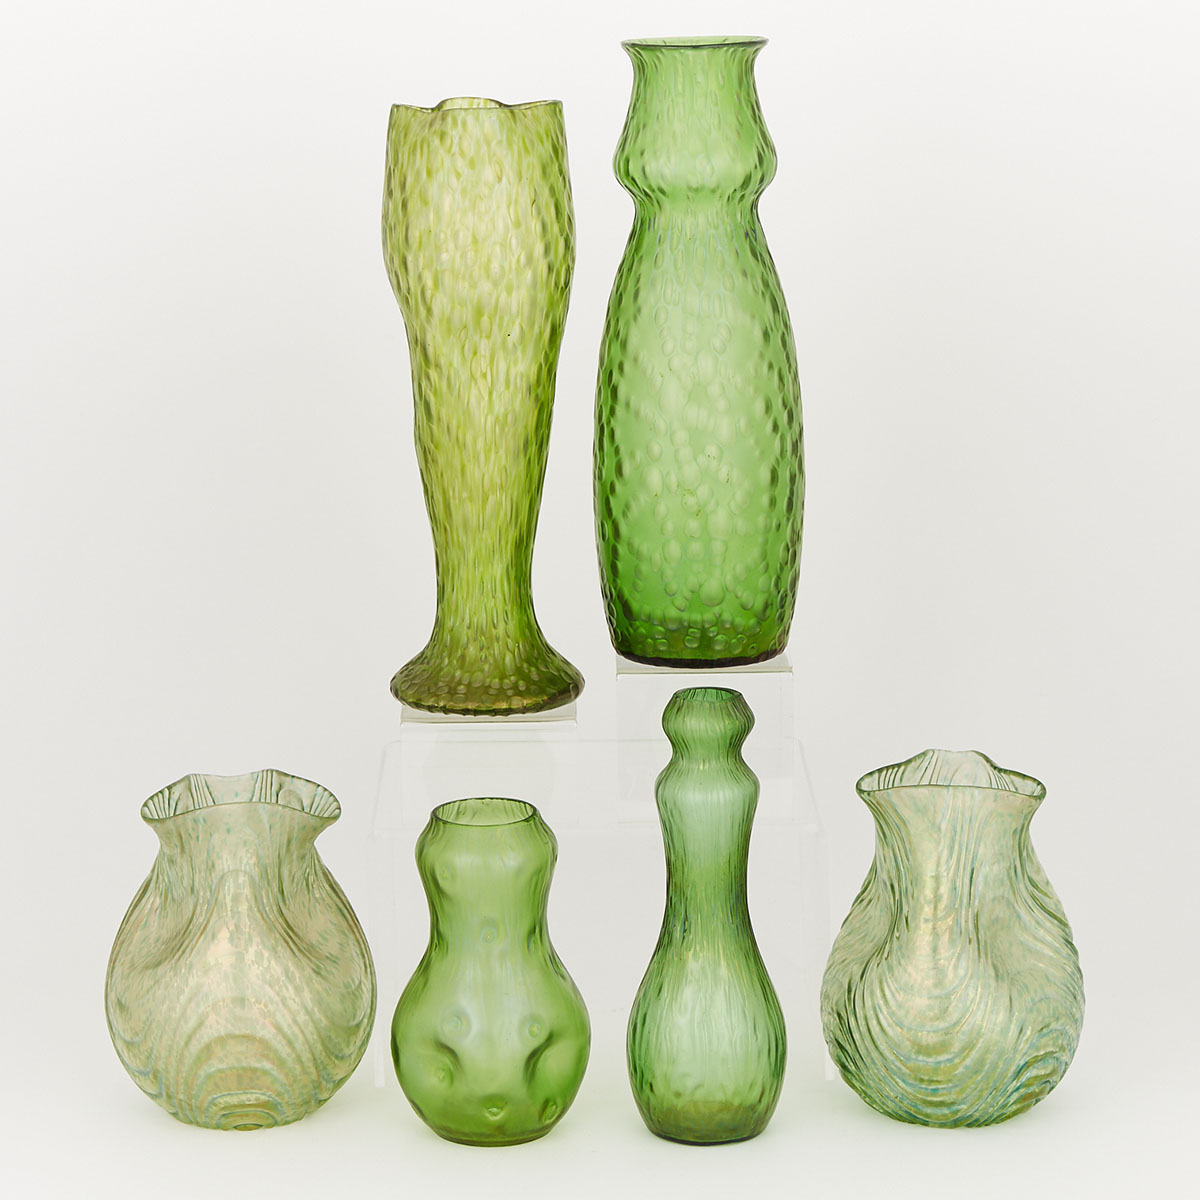 Six Bohemian Iridescent Green Glass Vases, early 20th century